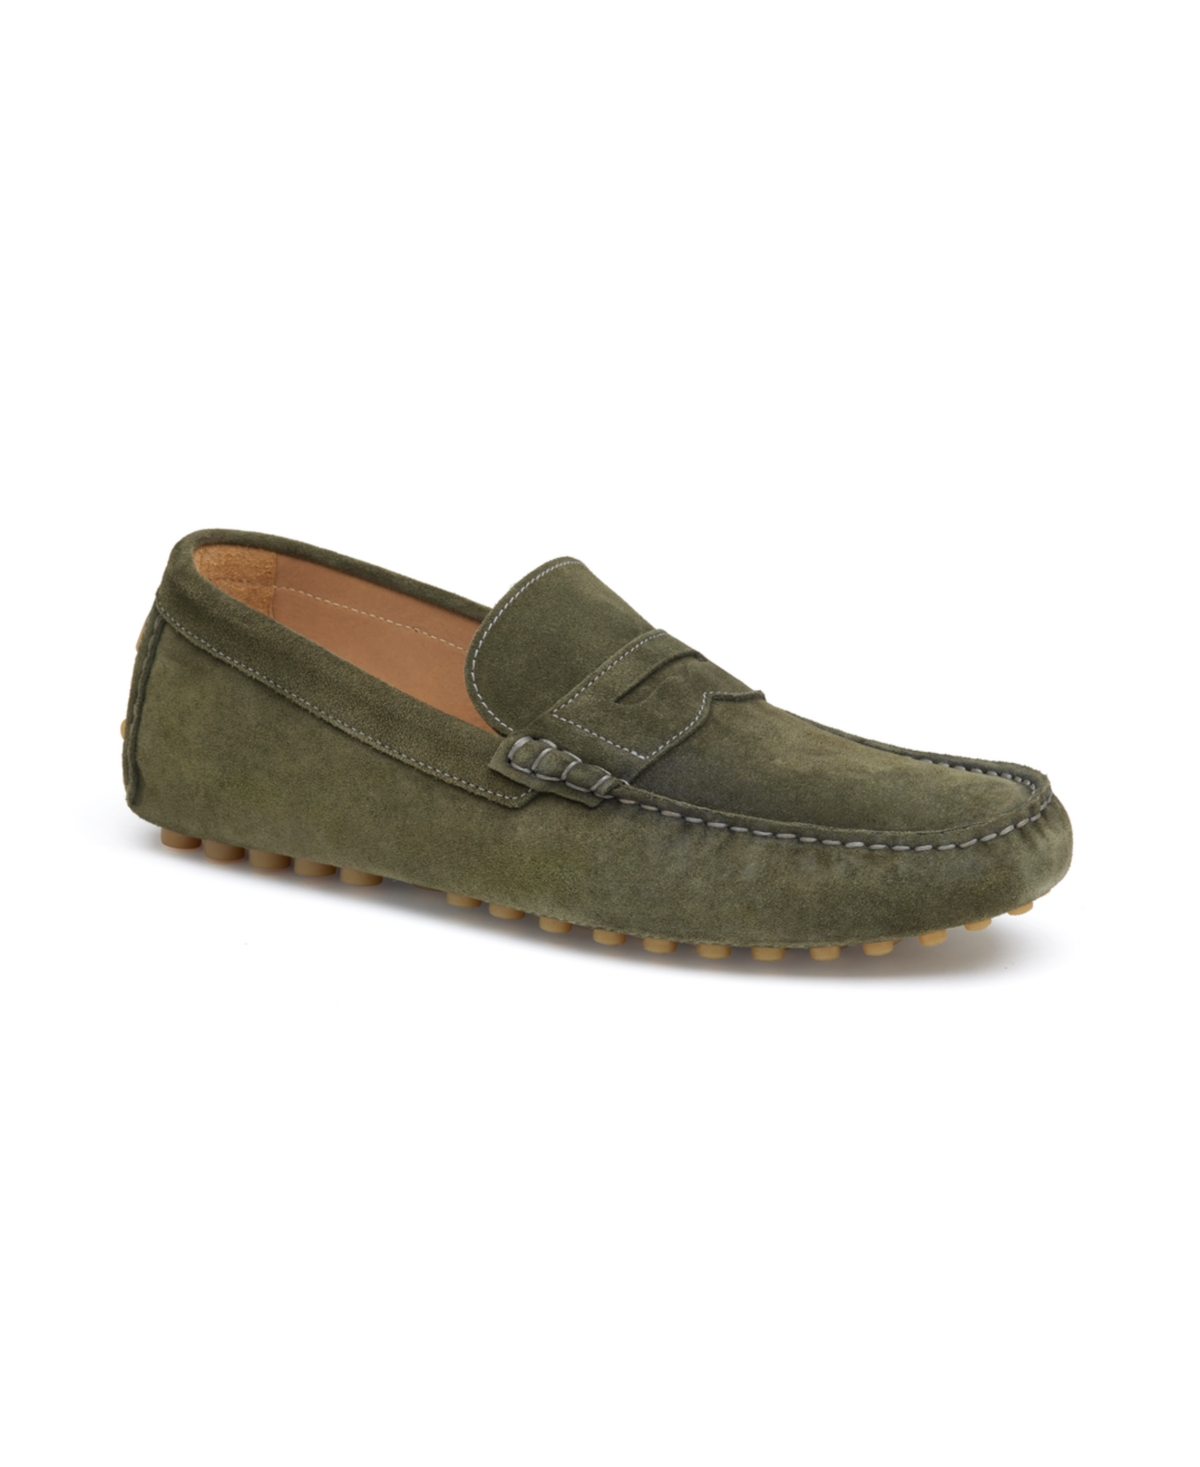 Men's Athens Penny Loafers - Olive